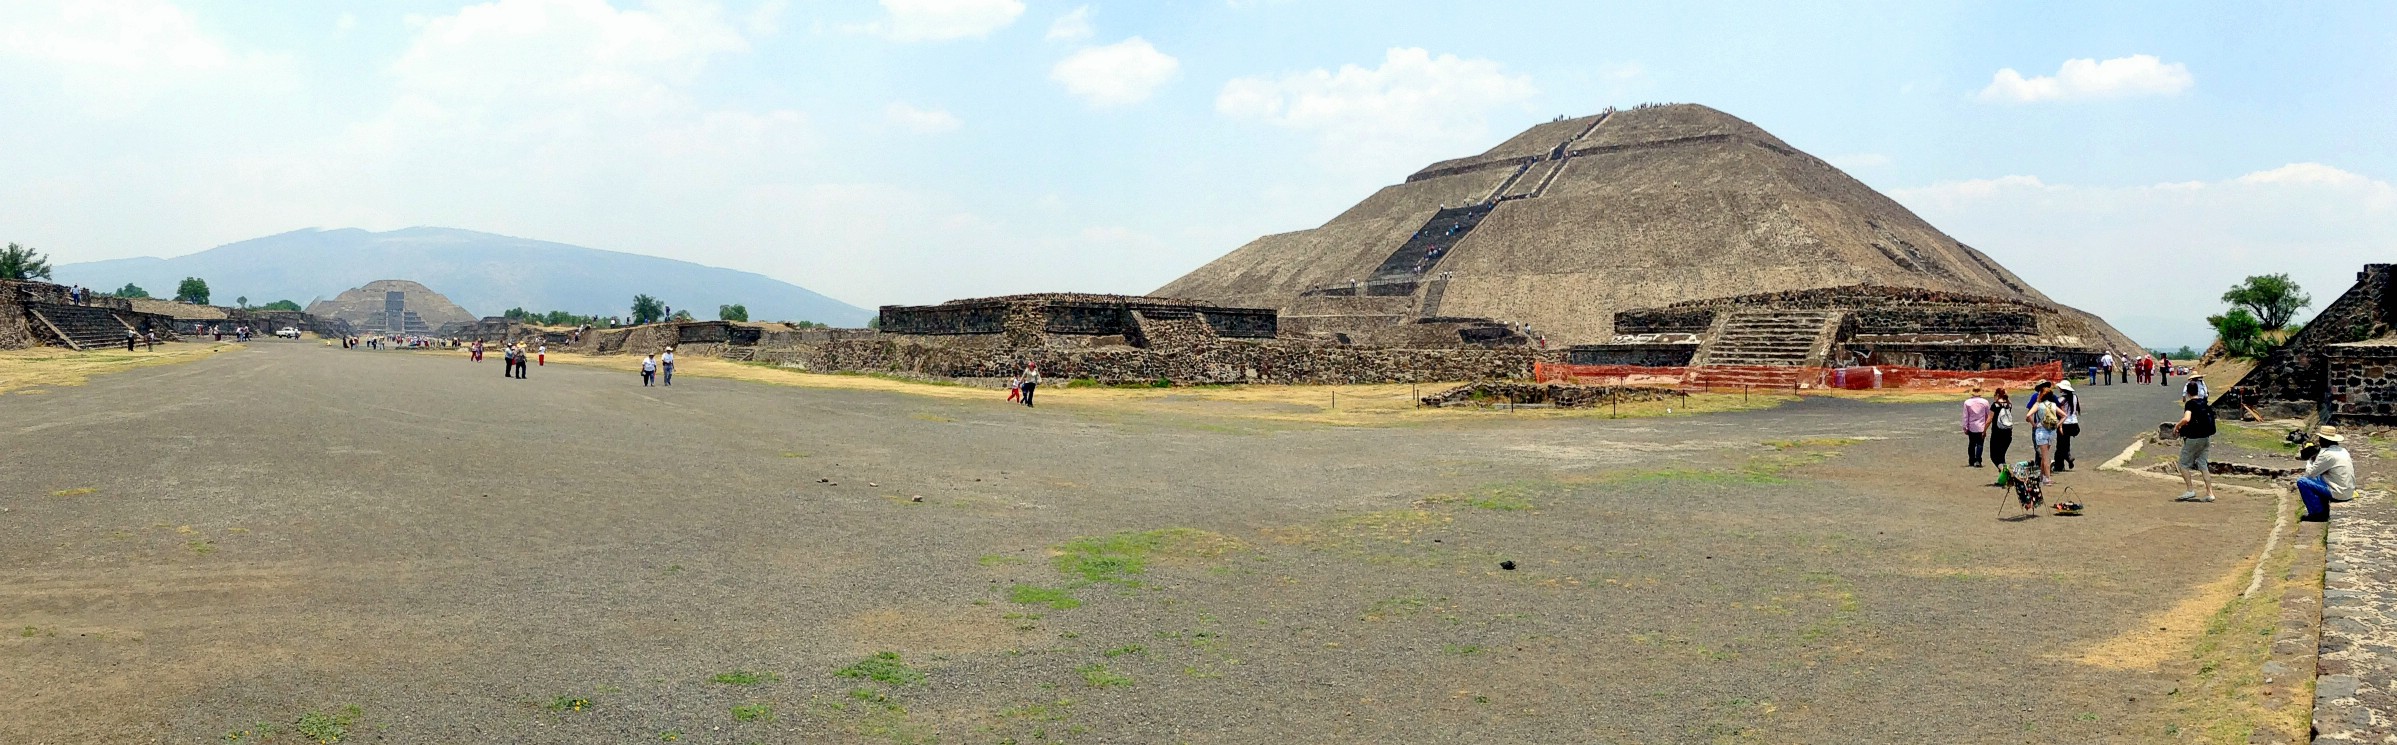 An iPod panorama of Teotihuacan, Mexico. April 29th 2013.